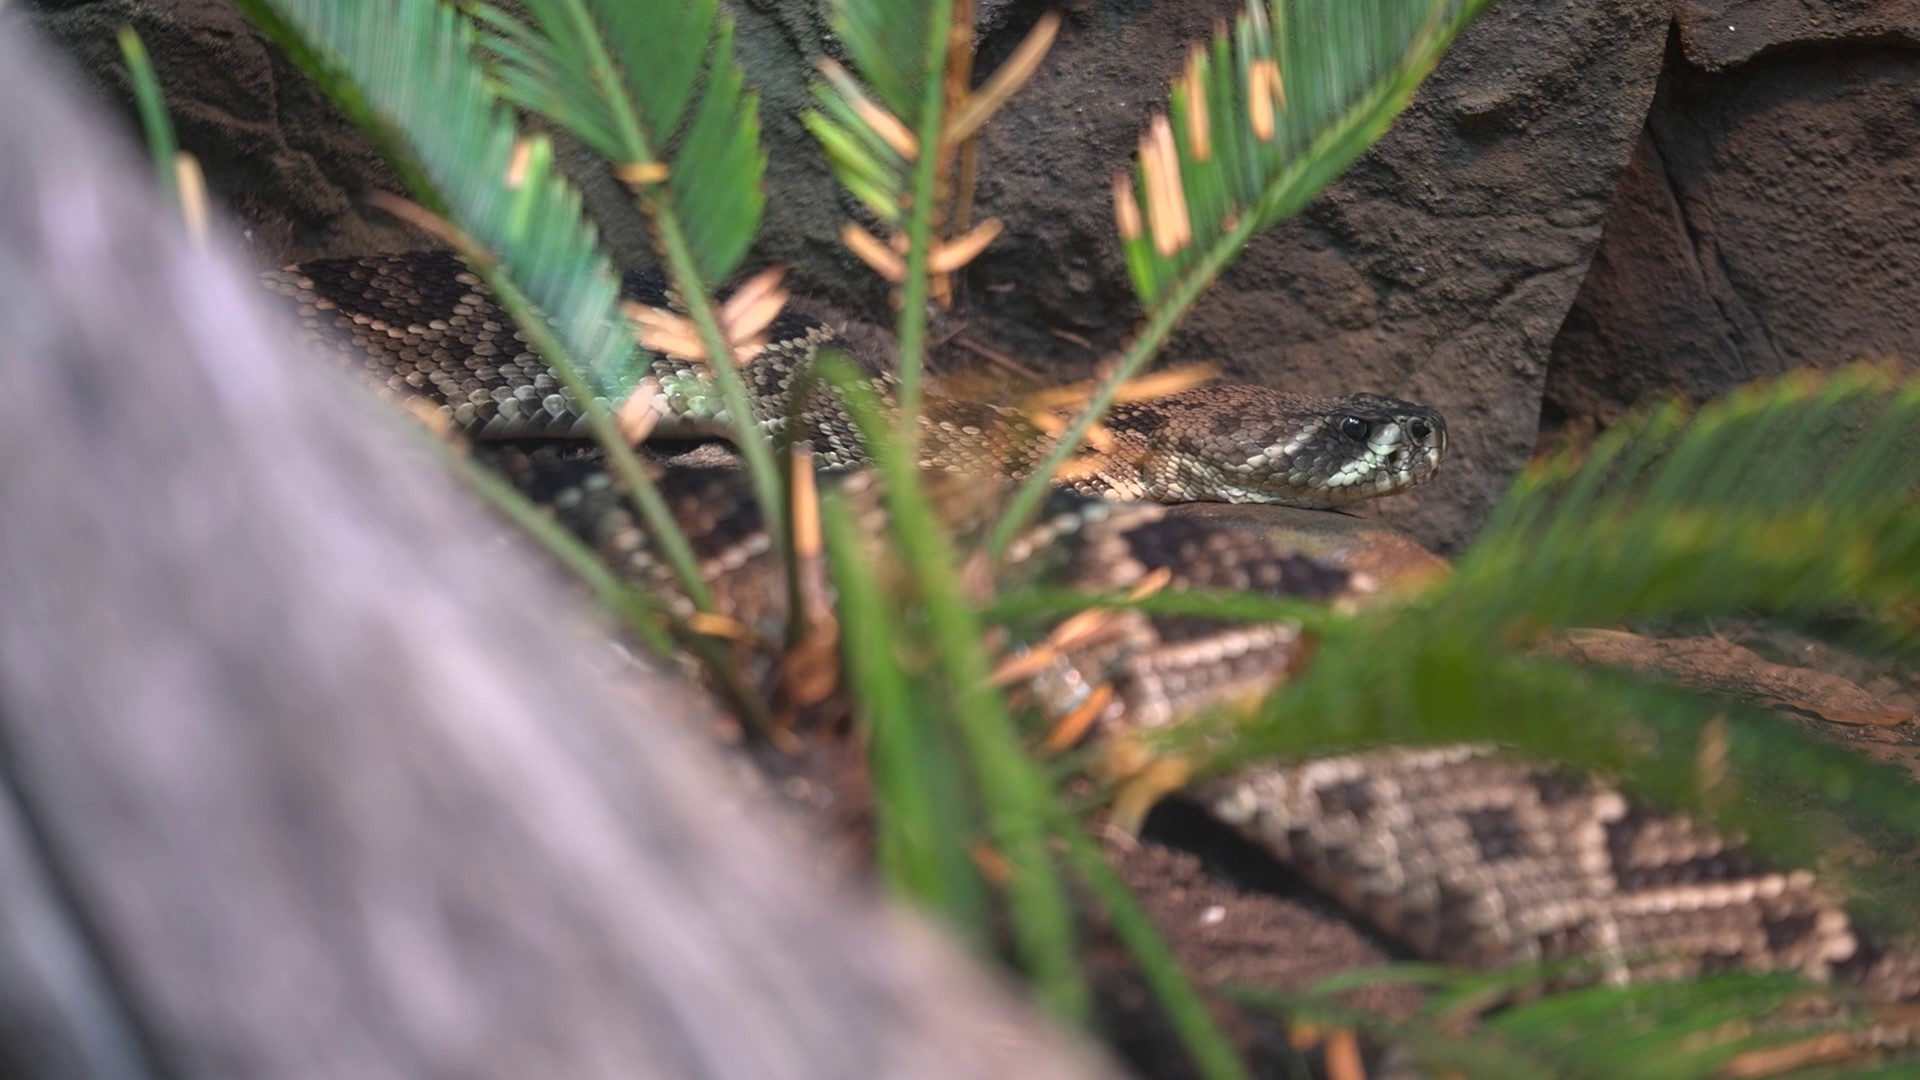 Award-winning reporter and alleged snake documentarian Matt Howerton went to the zoo in a scientific effort to understand the key to a glorious Texas Rangers victory